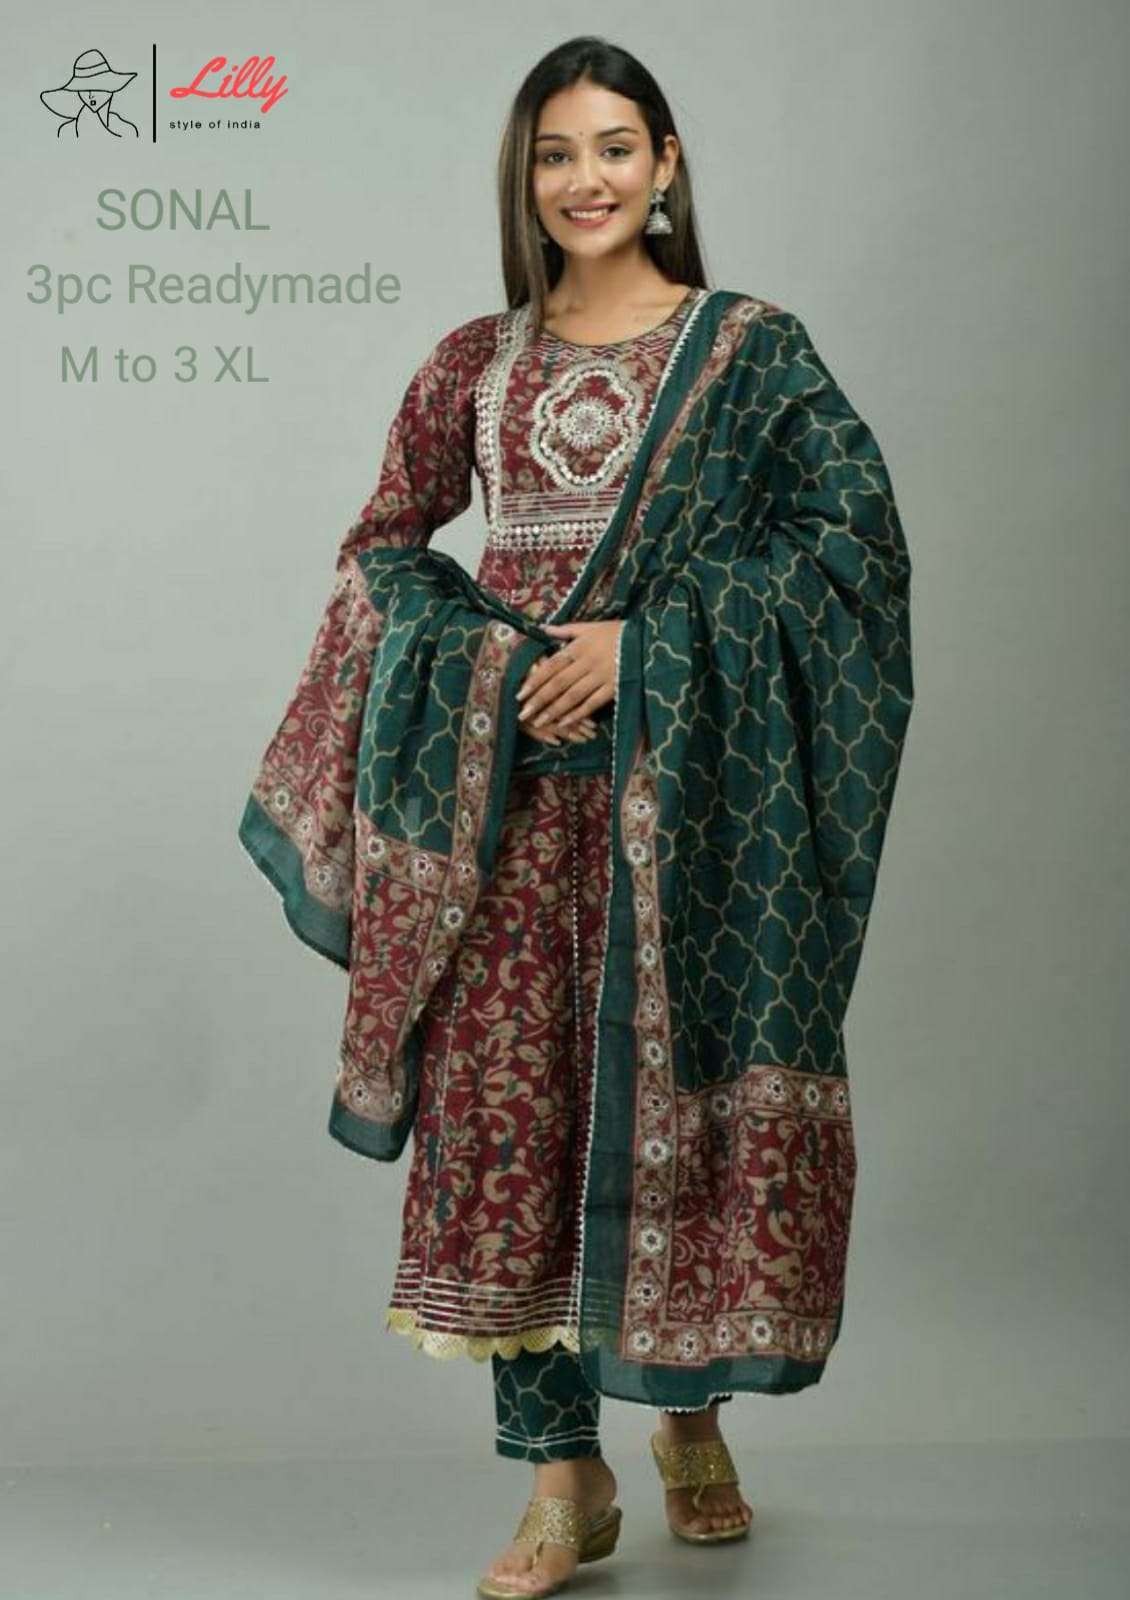 lilly style of india sonal Full flair pure cotton readymade suit 